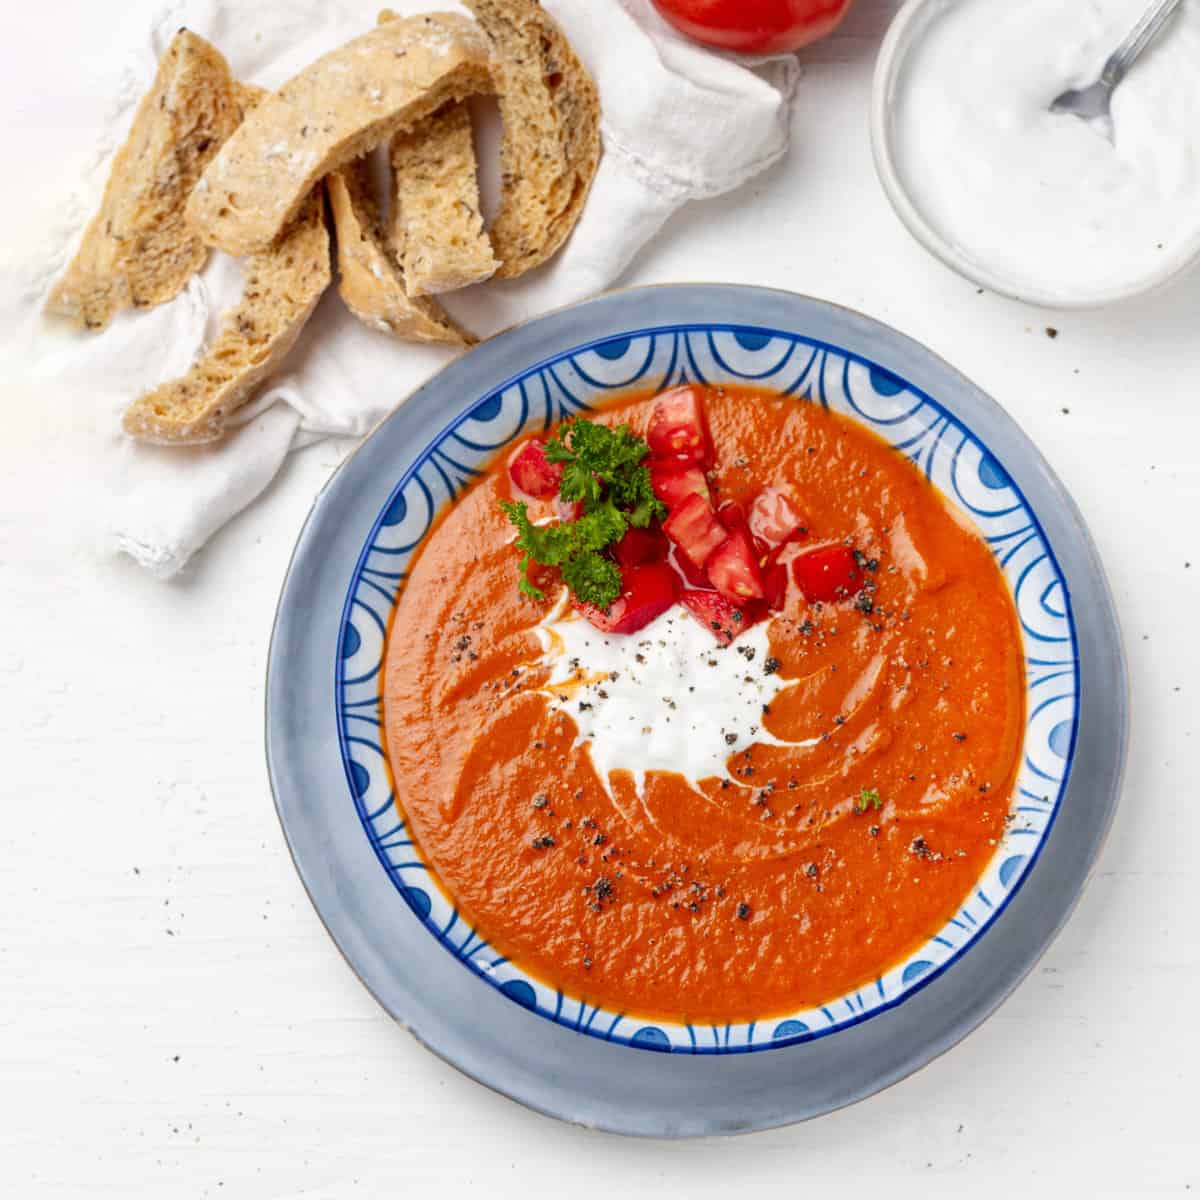 Tomato Soup served in a bowl with tomatoes at display